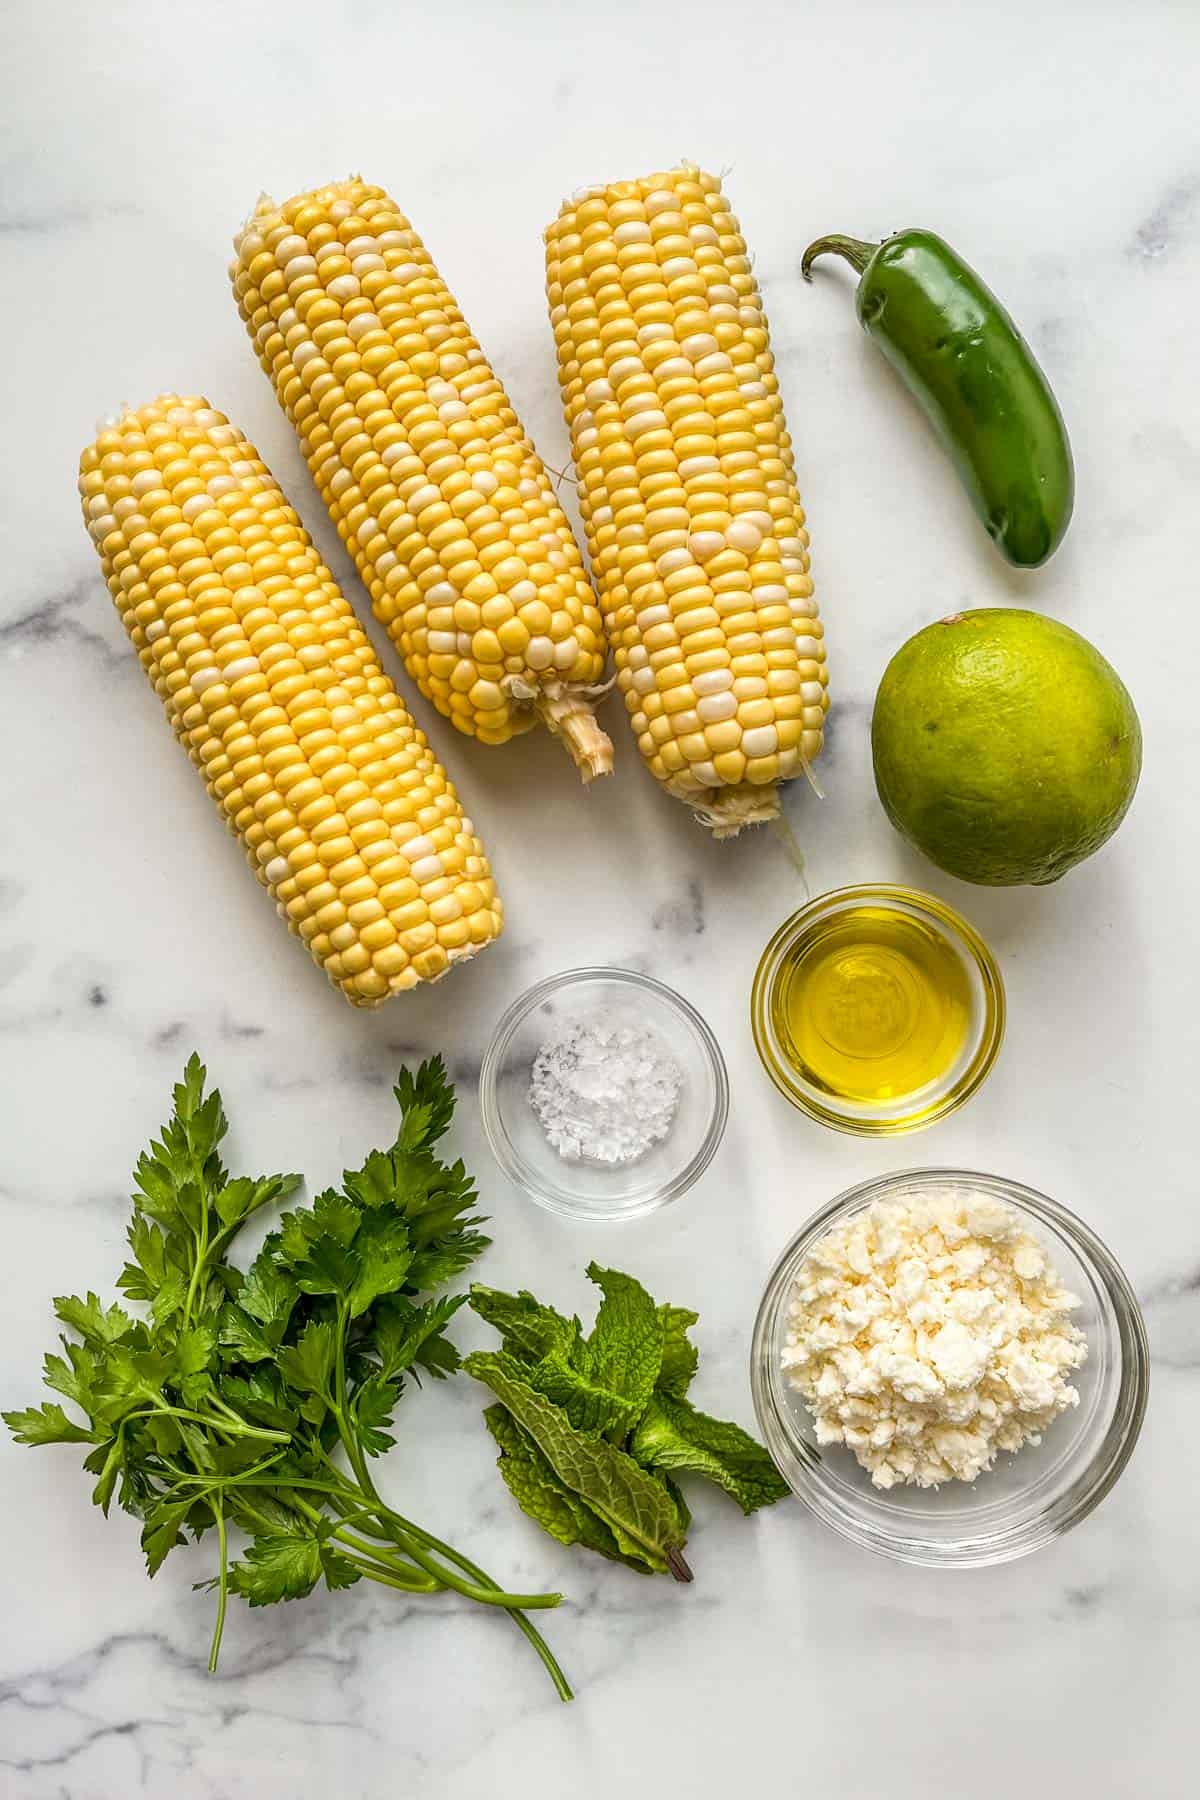 Sweet corn, jalapeno, lime, olive oil, feta cheese, mint, and parsley.